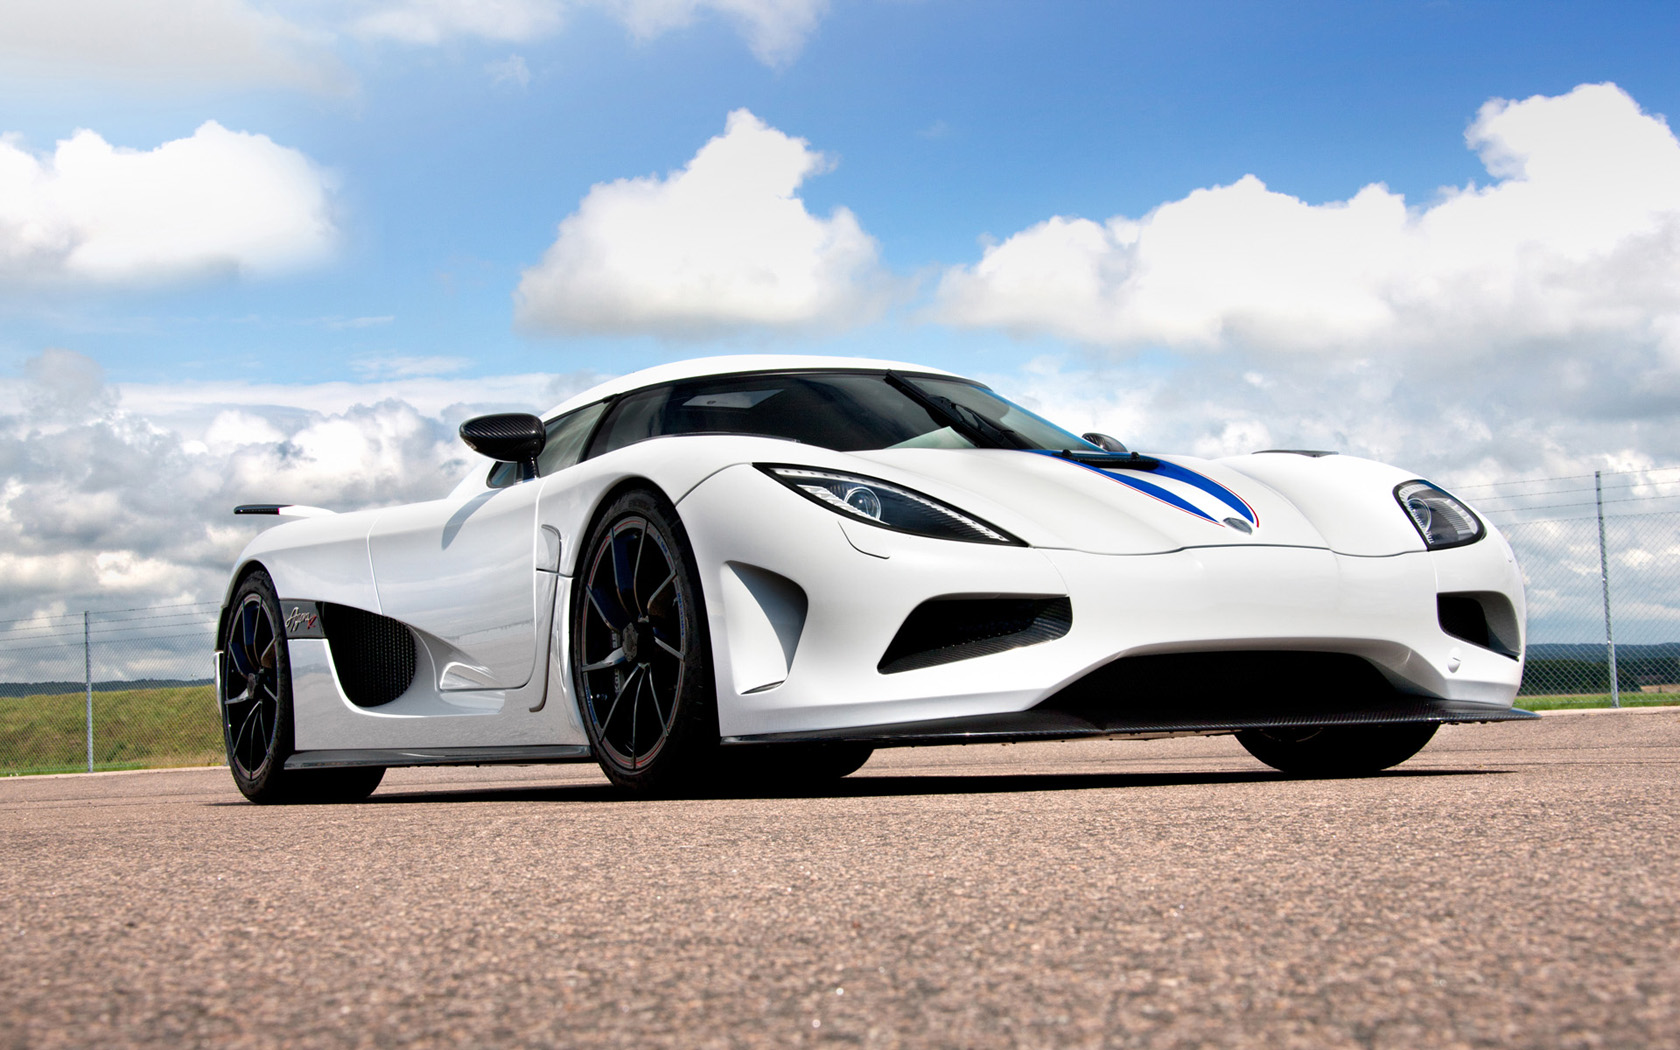 White Koenigsegg Agera - Full Hd Car Wallpapers Download , HD Wallpaper & Backgrounds